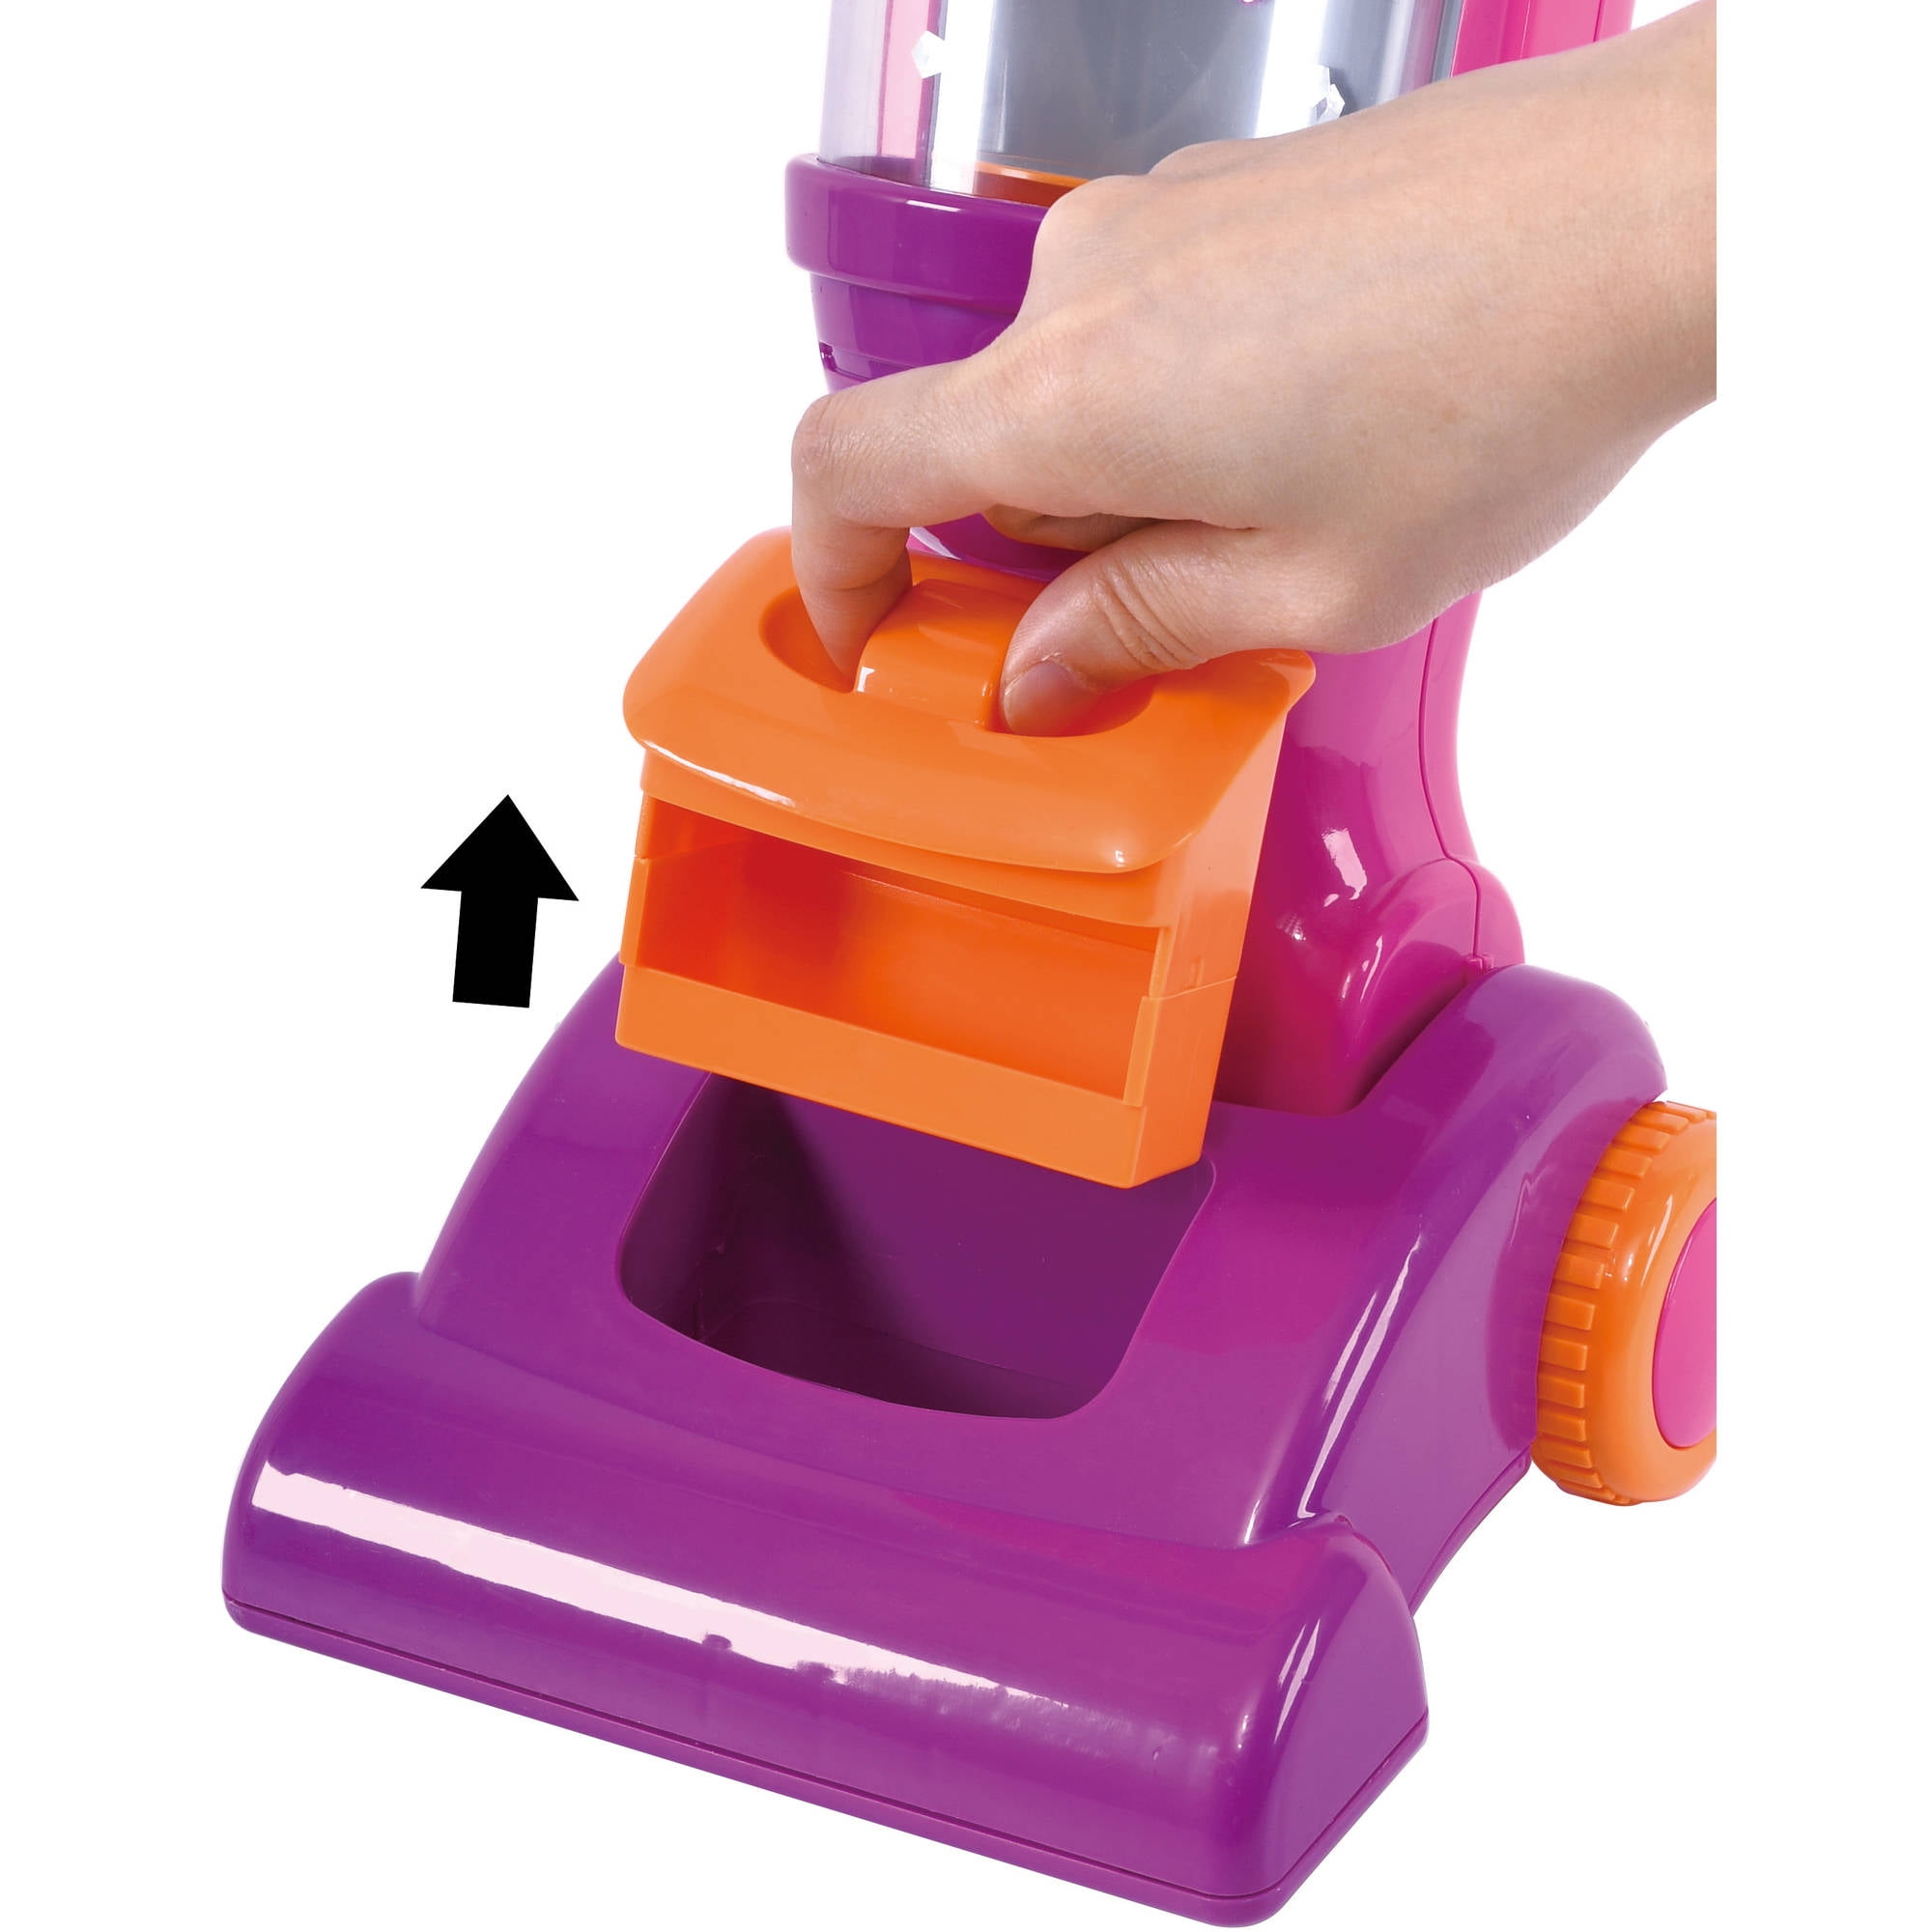 Playgo Complete Cleaning Vacuum Combo Playset